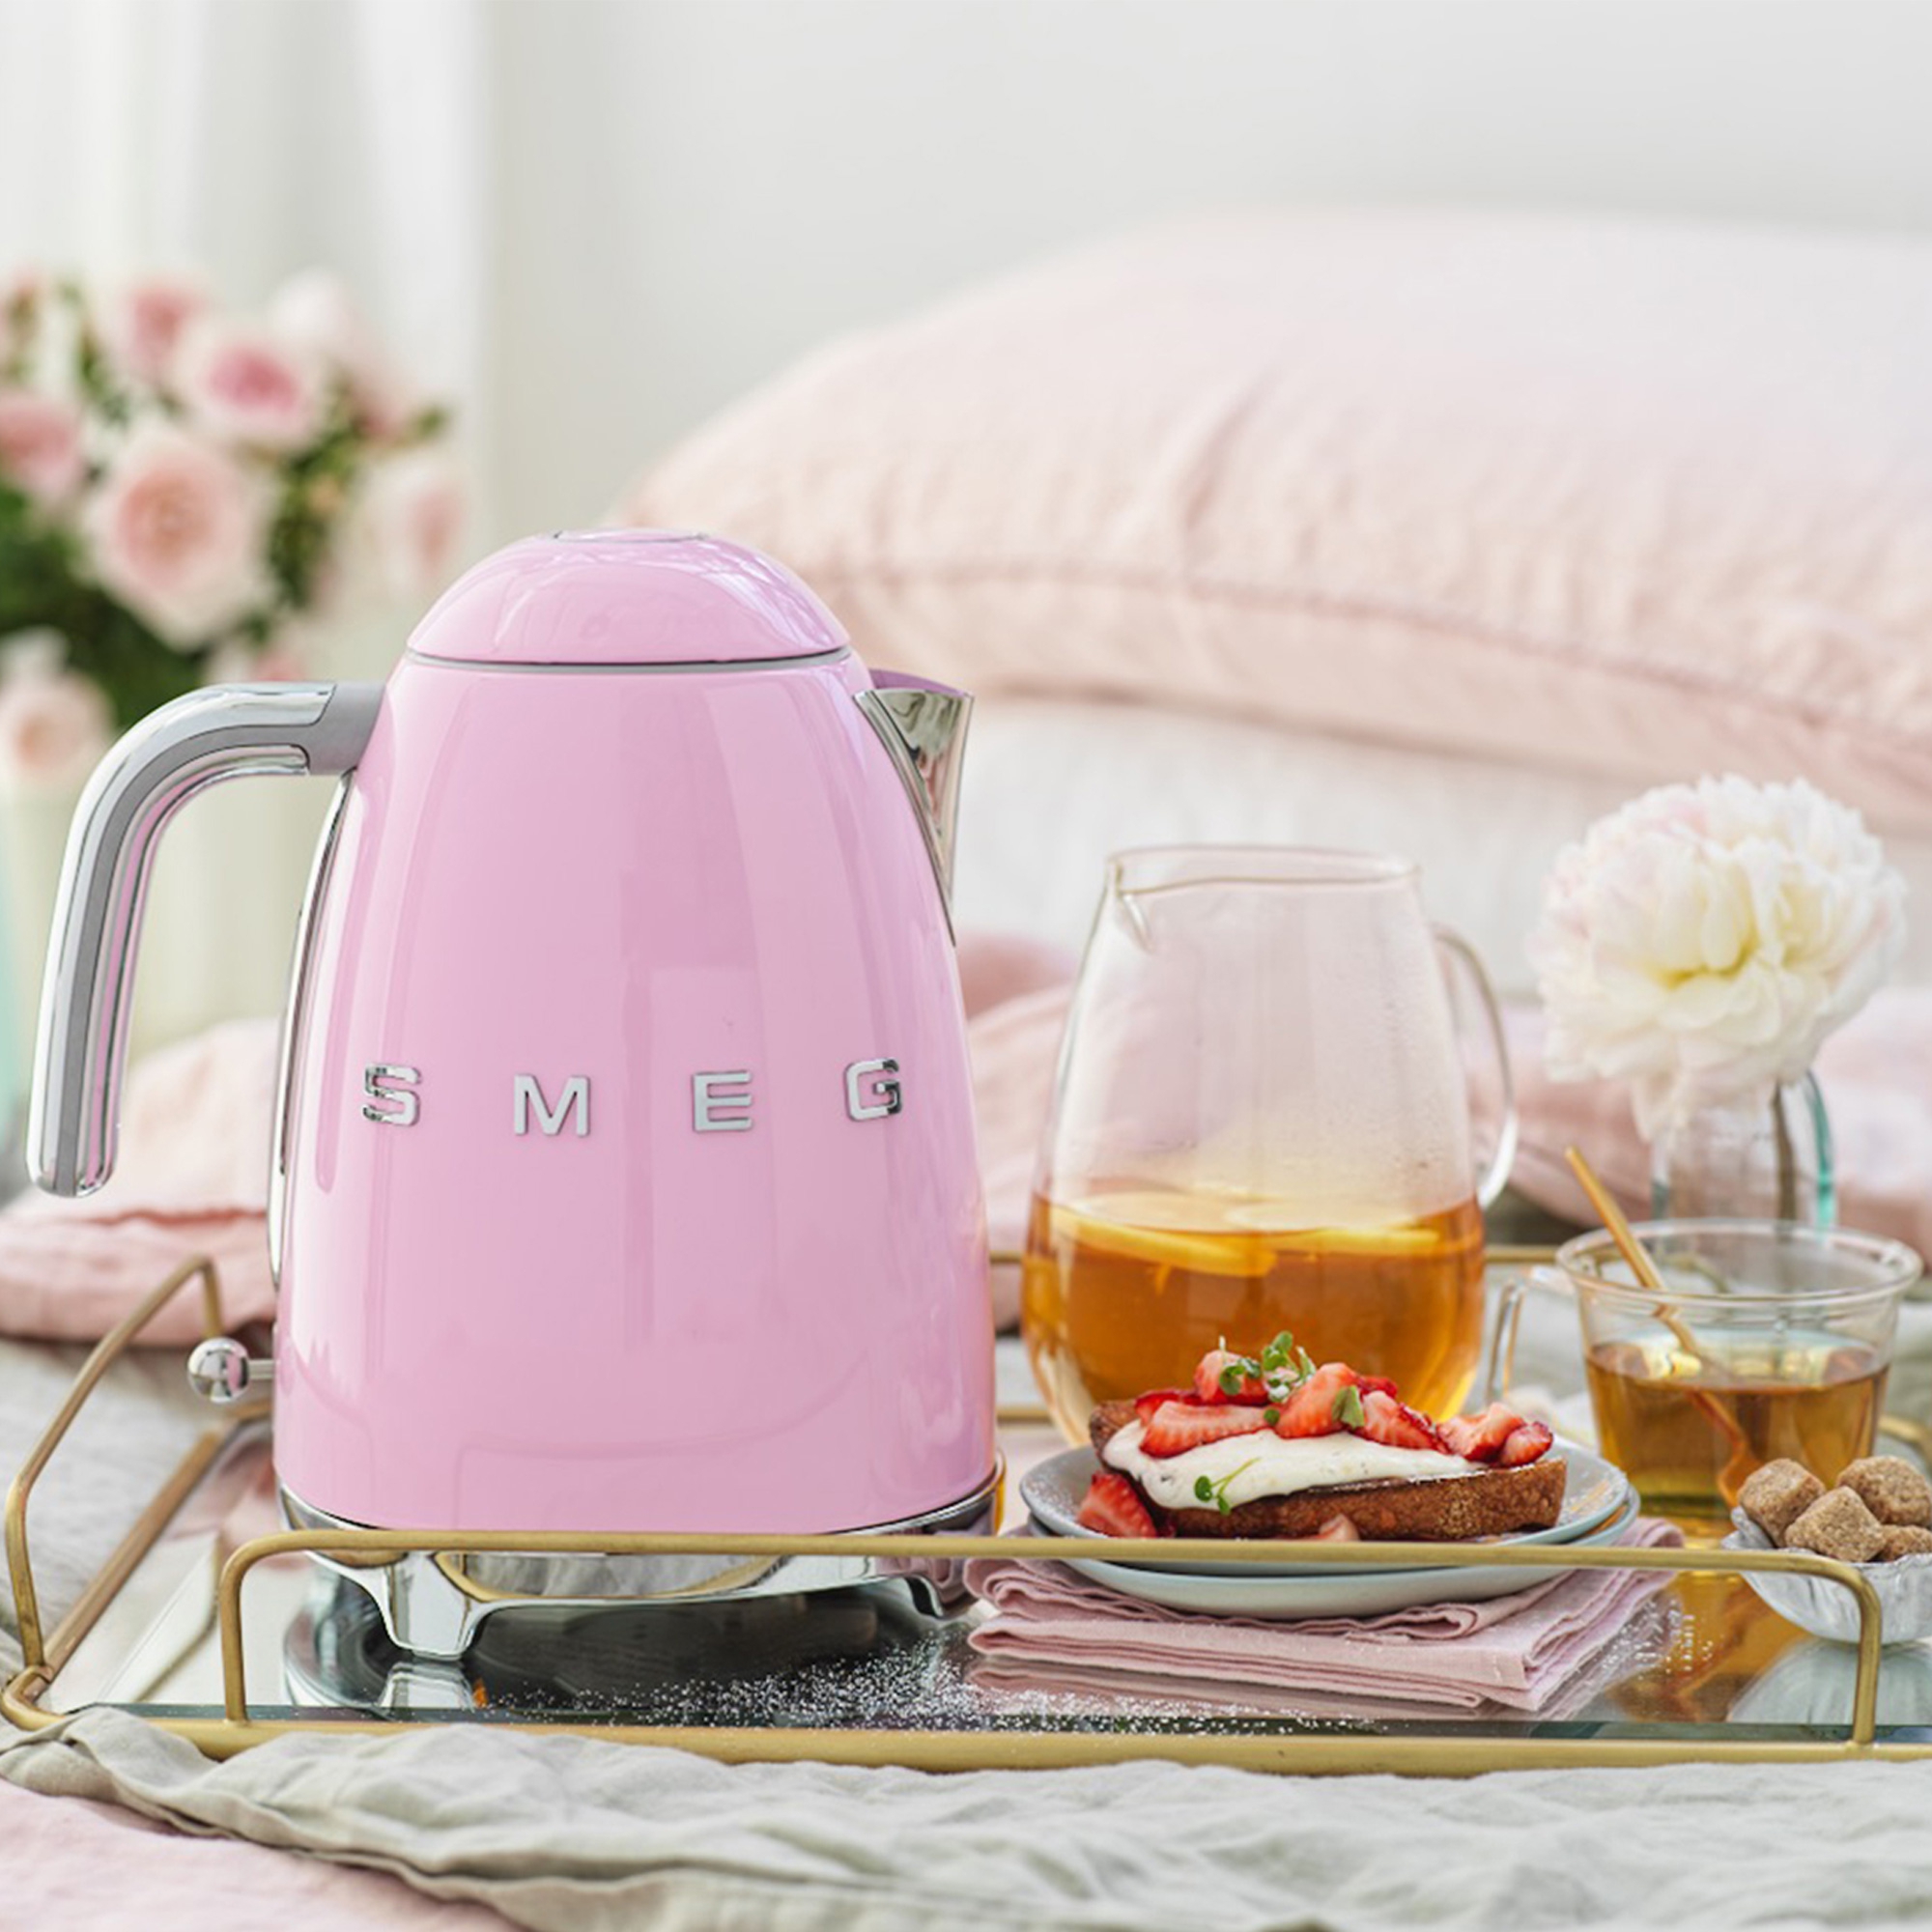 Smeg - 1.7 L kettle - design line style The 50 ° years - pink